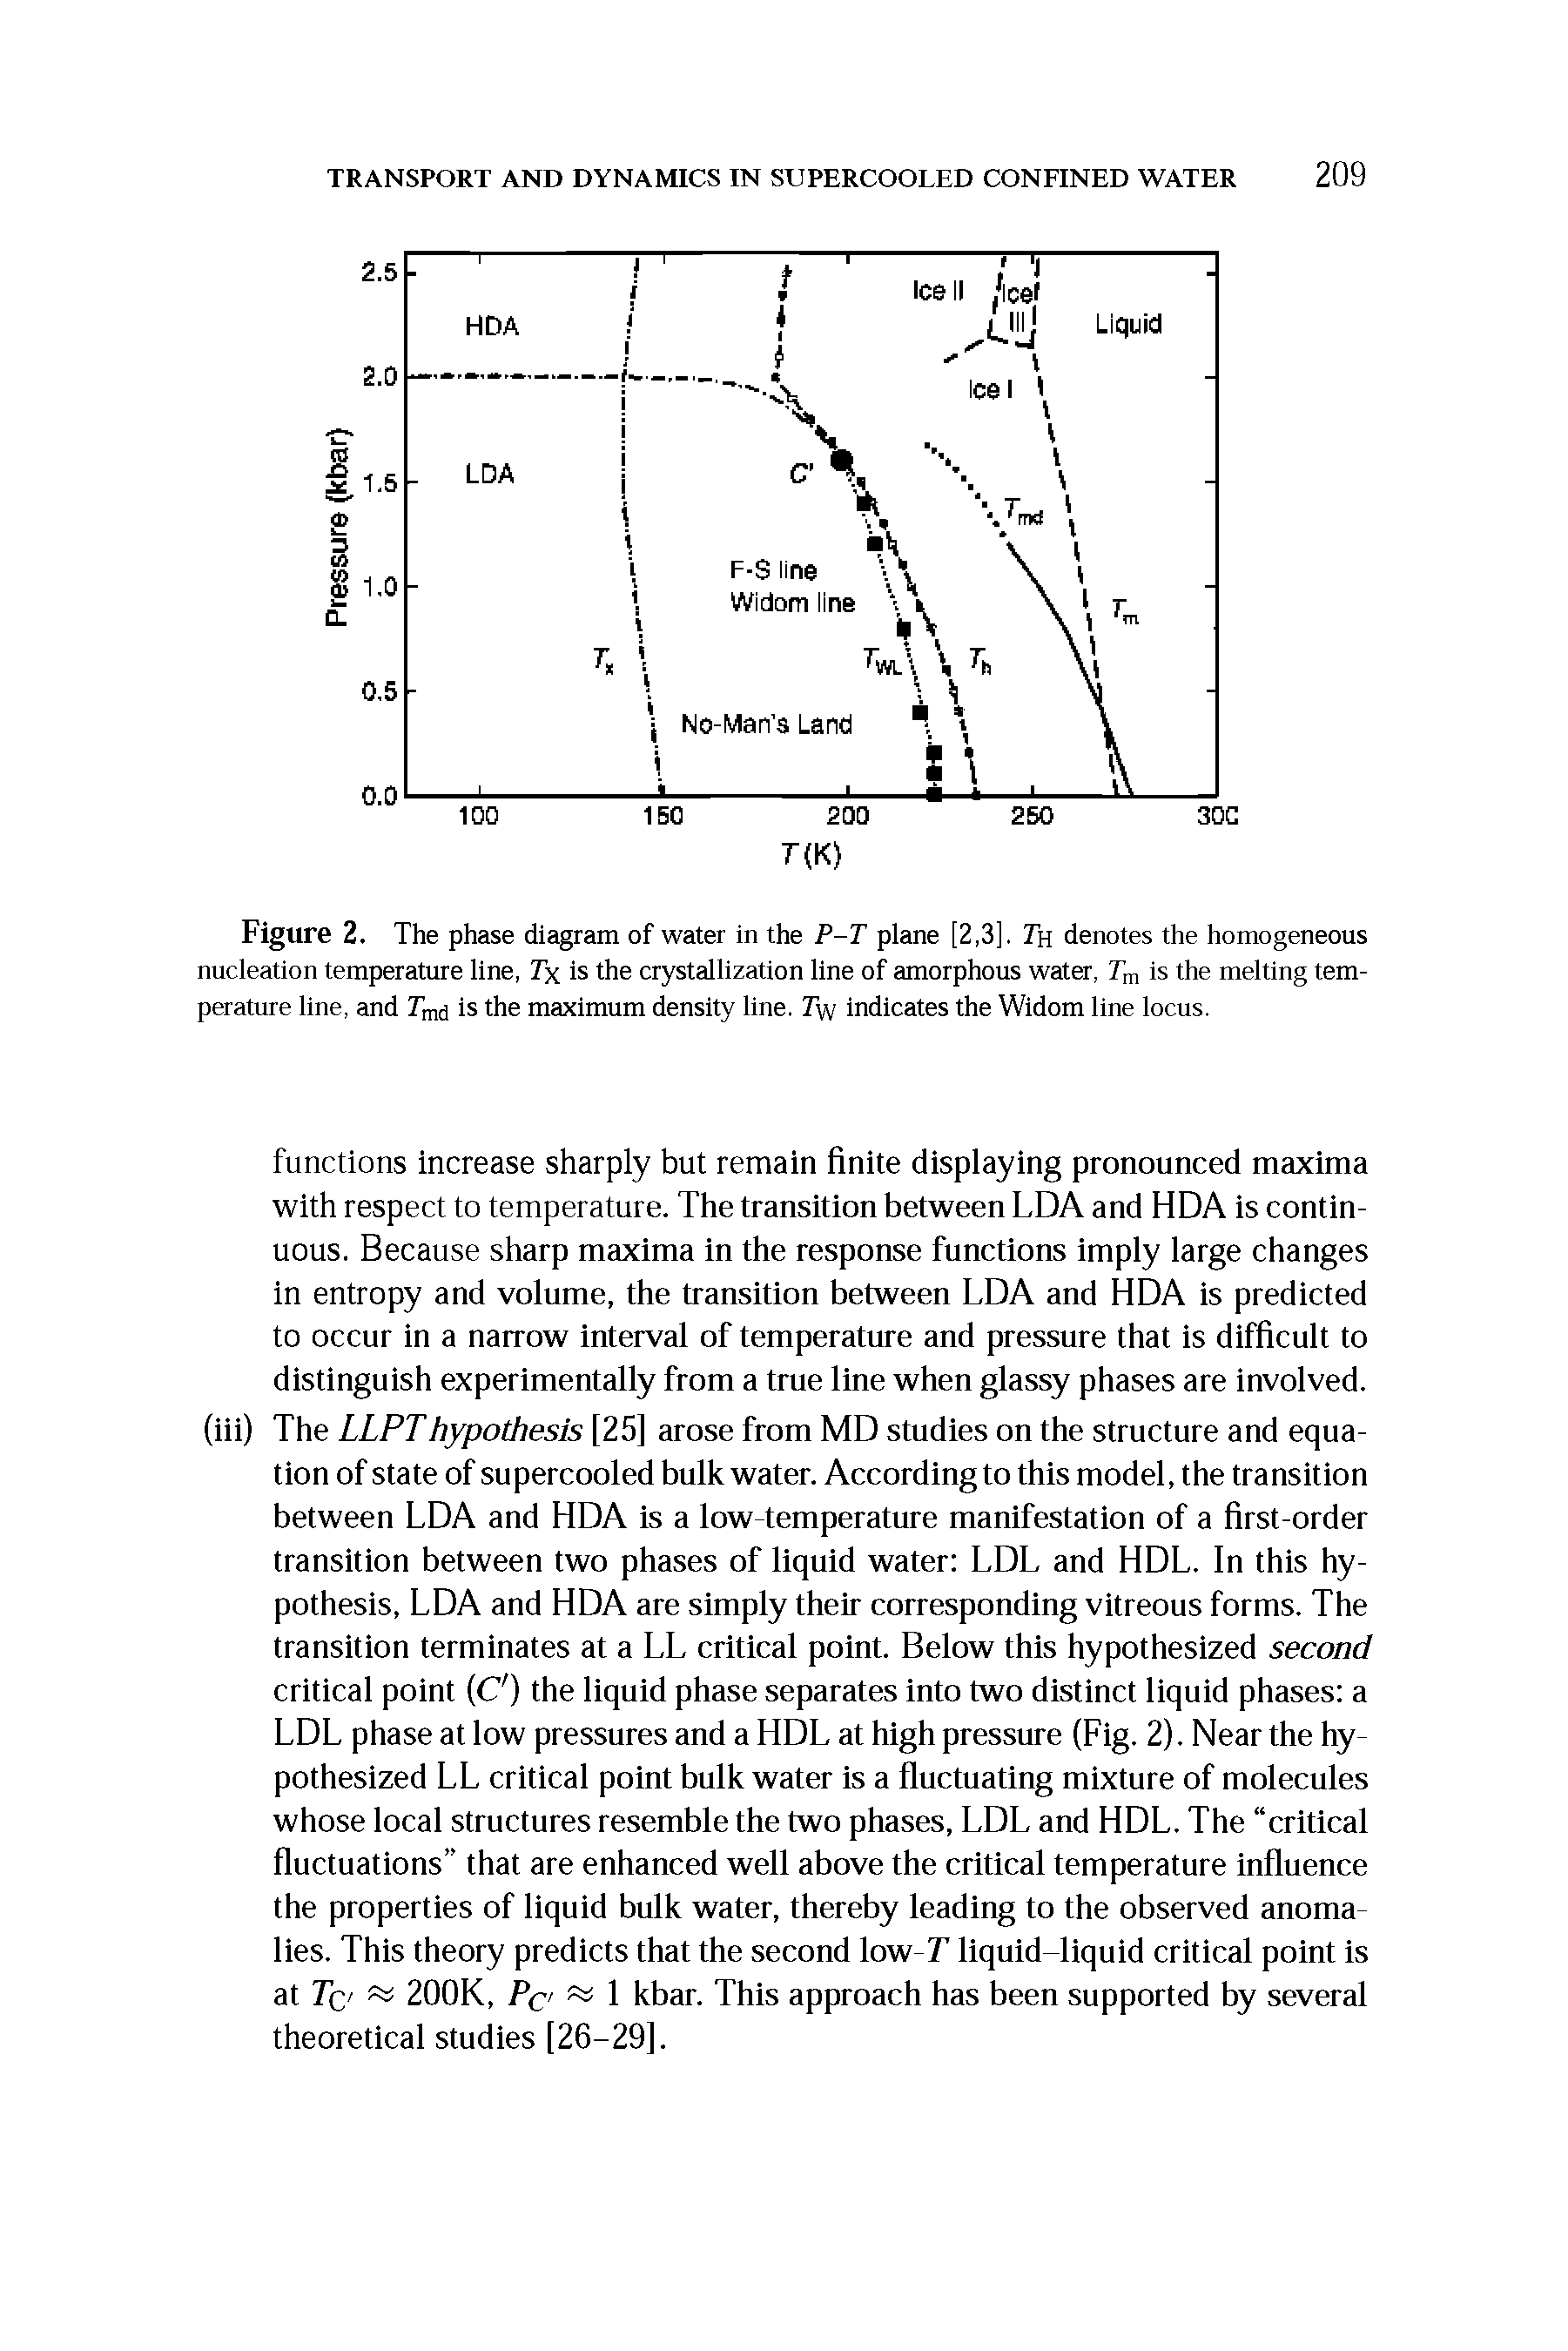 Figure 2. The phase diagram of water in the P-T plane [2,3]. Th denotes the homogeneous nucleation temperature line, Tx is the crystallization line of amorphous water, is the melting temperature line, and Tmd is the maximum density line. Tw indicates the Widom line locus.